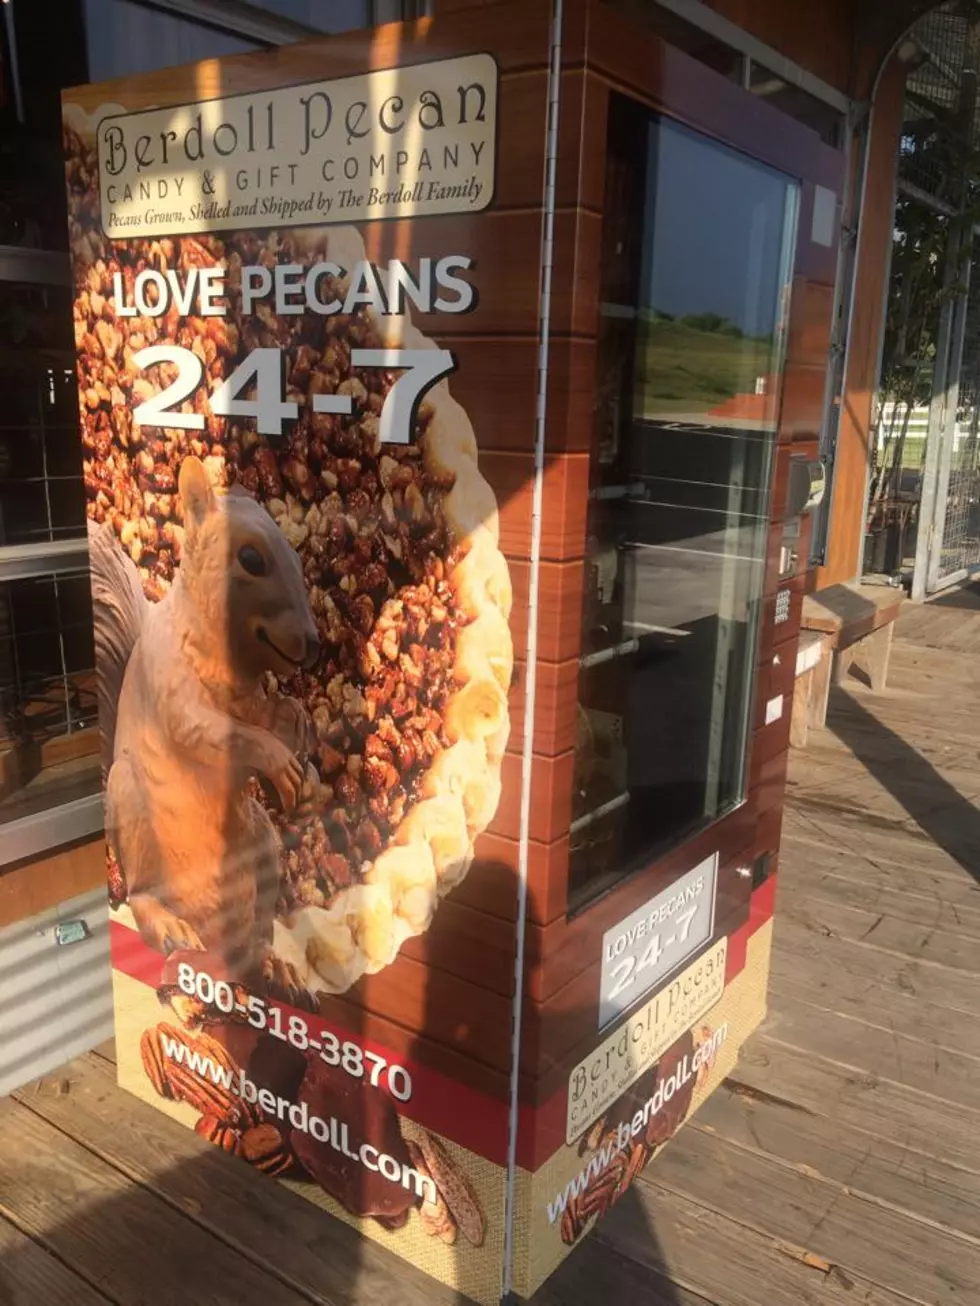 Only in Texas:  Whole Pecan Pies in a Vending Machine